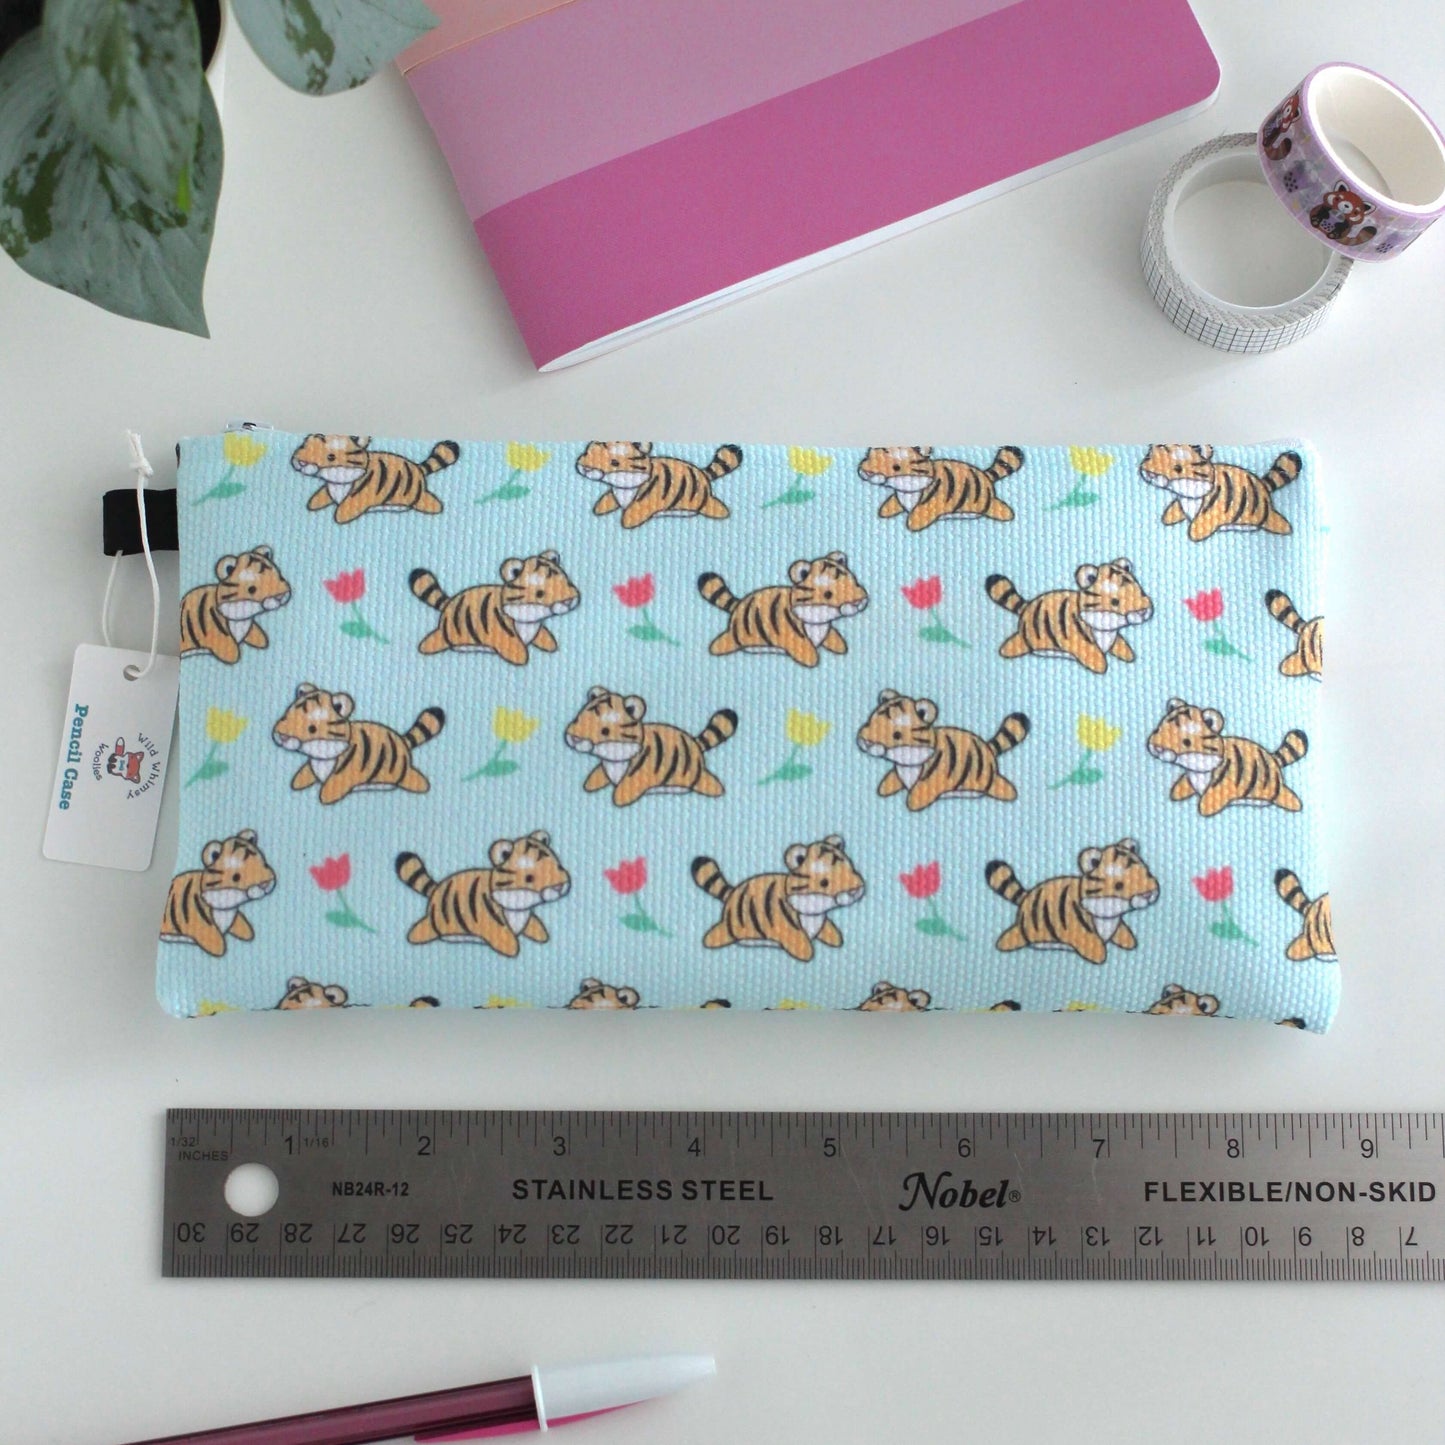 Leaping Tigers with Tulips Pencil Case / Zipper Pouch